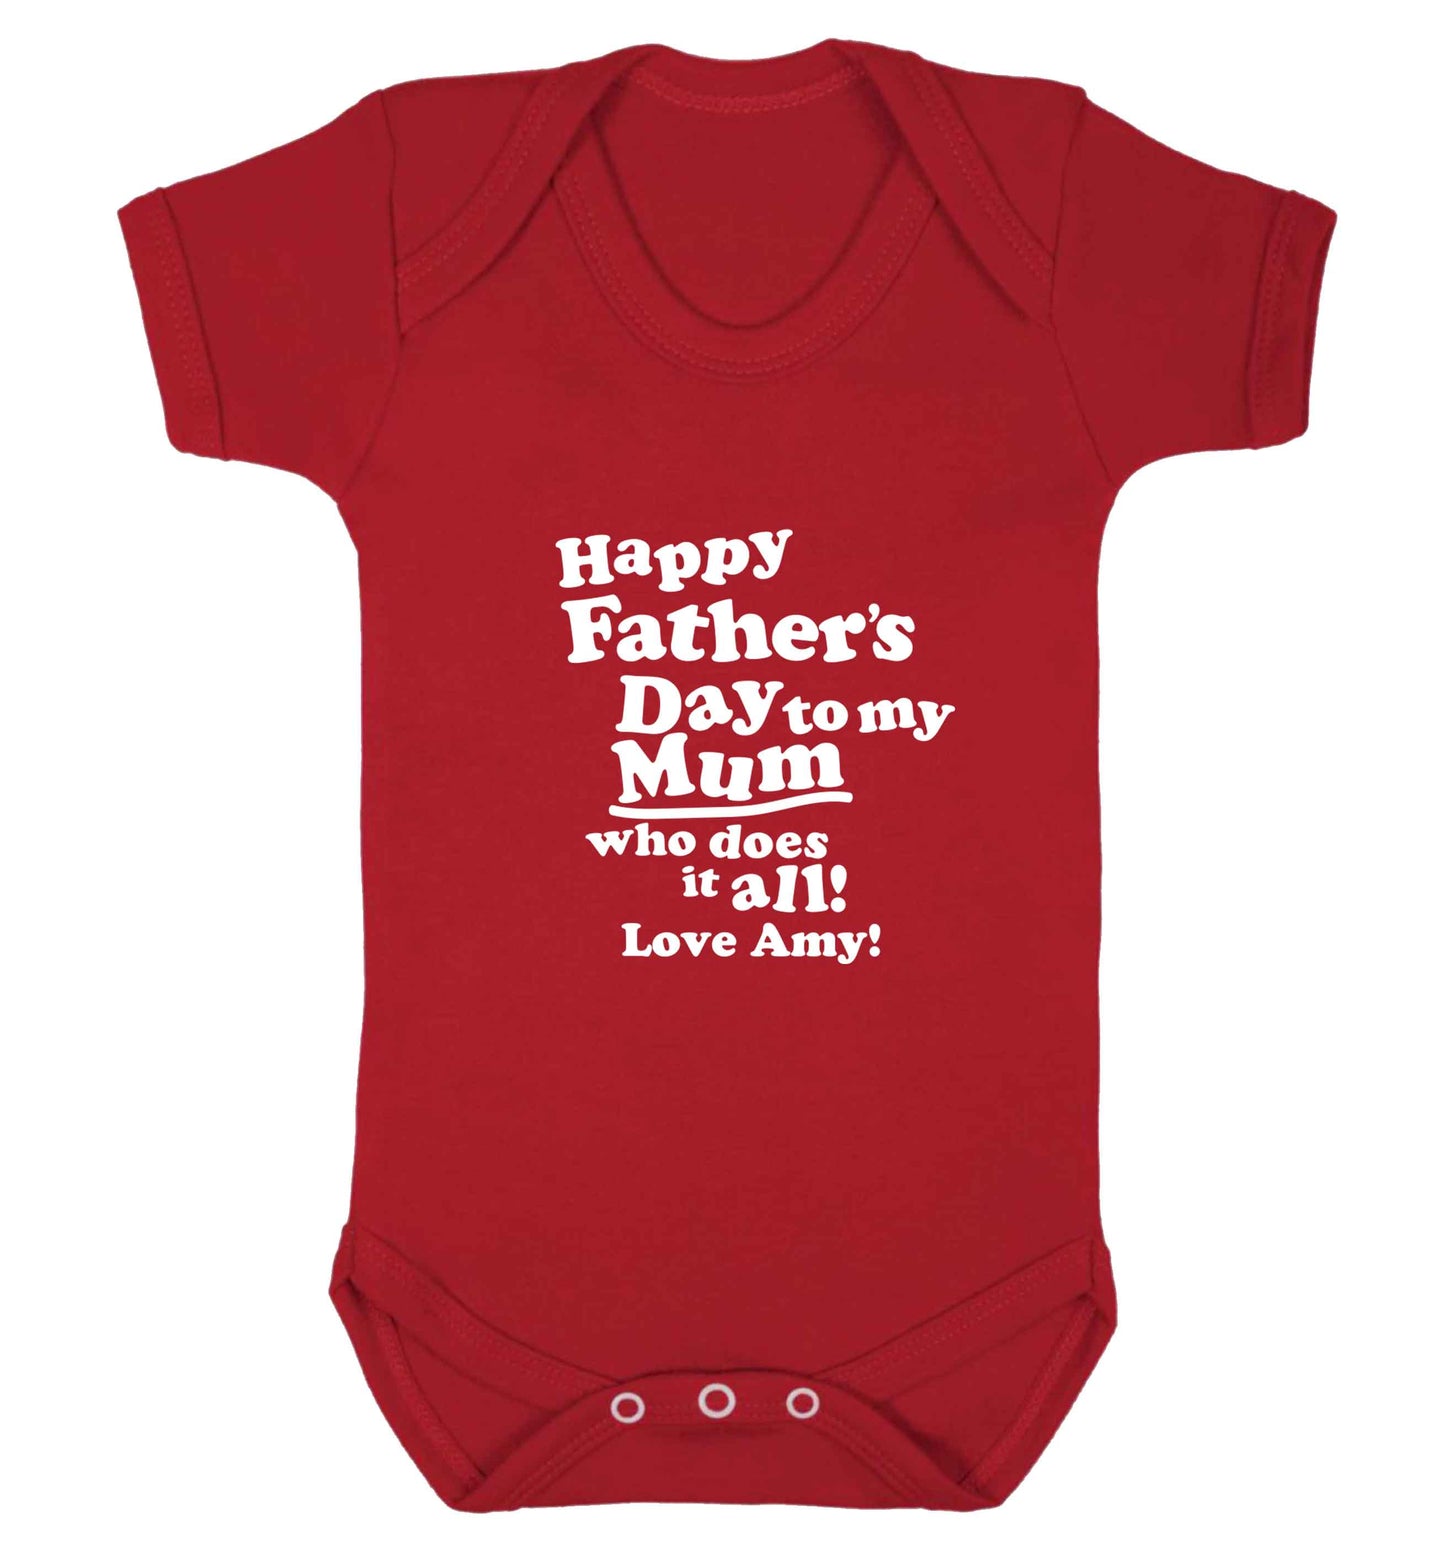 Happy Father's day to my mum who does it all baby vest red 18-24 months